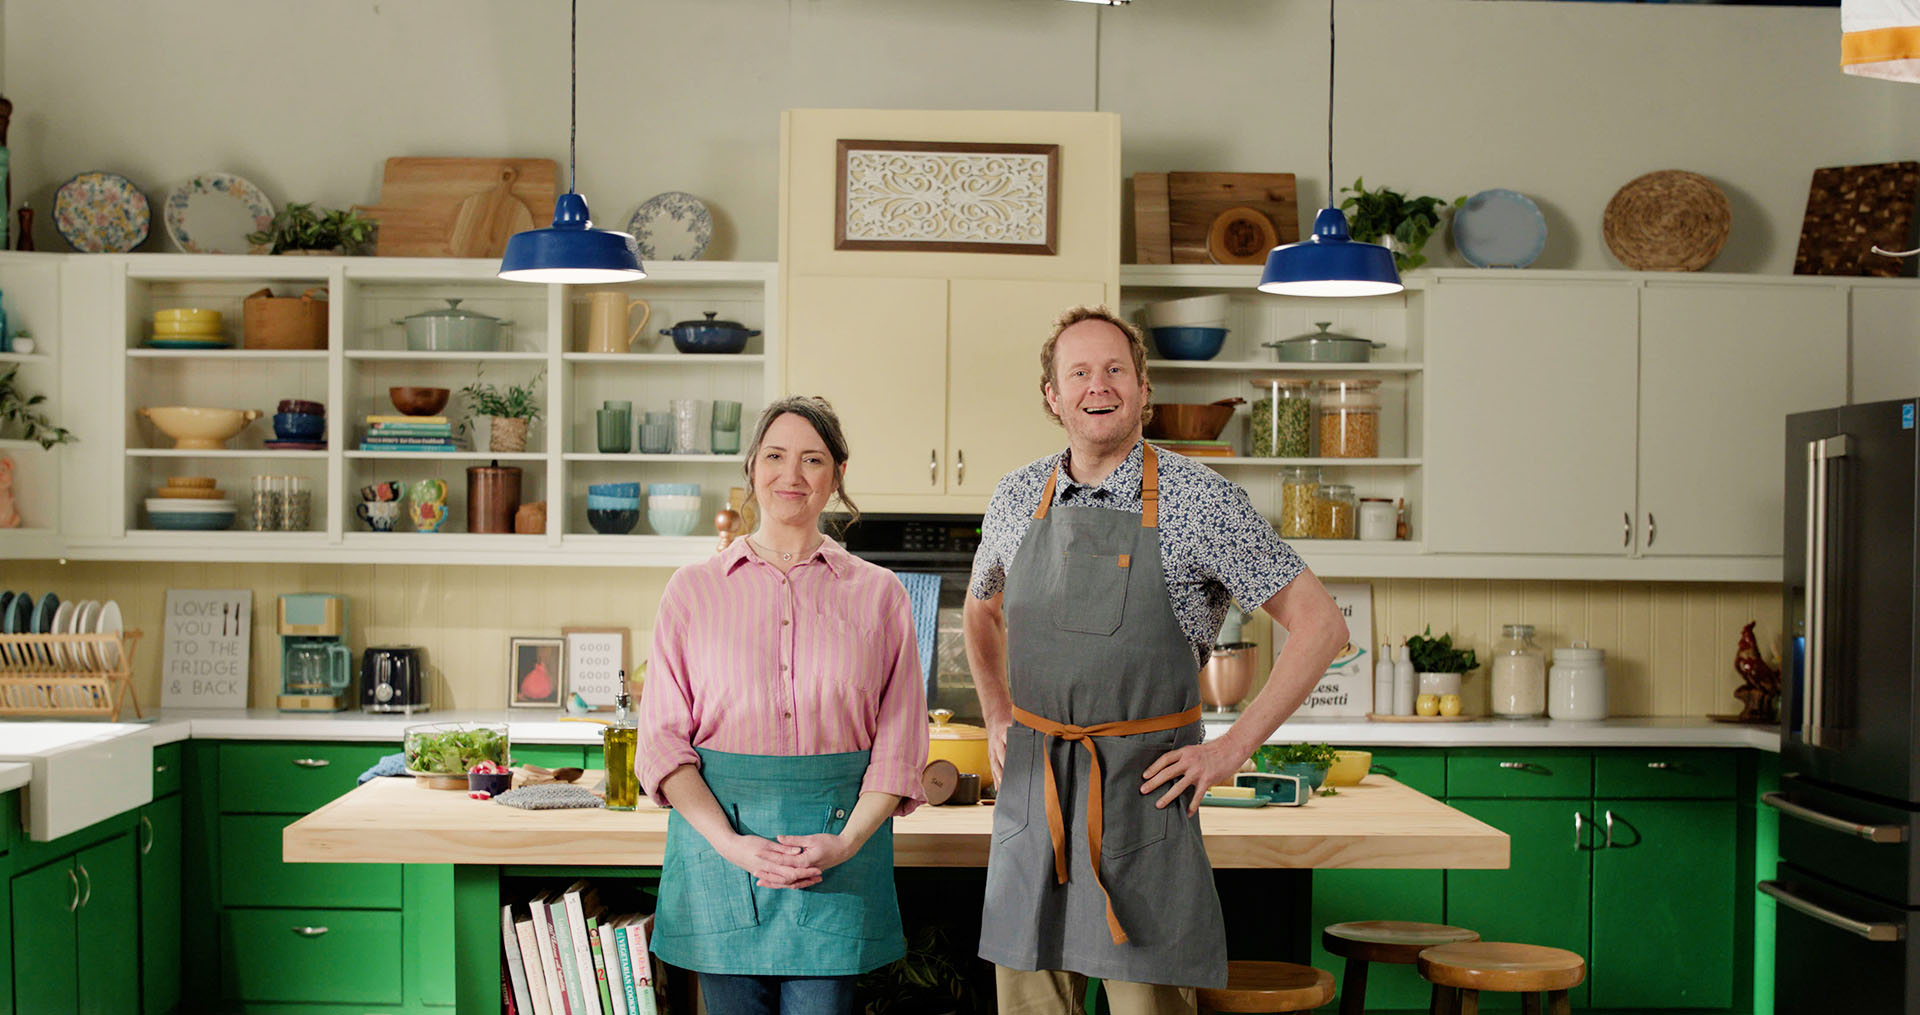 A man and woman standing in a kitchen, smiling